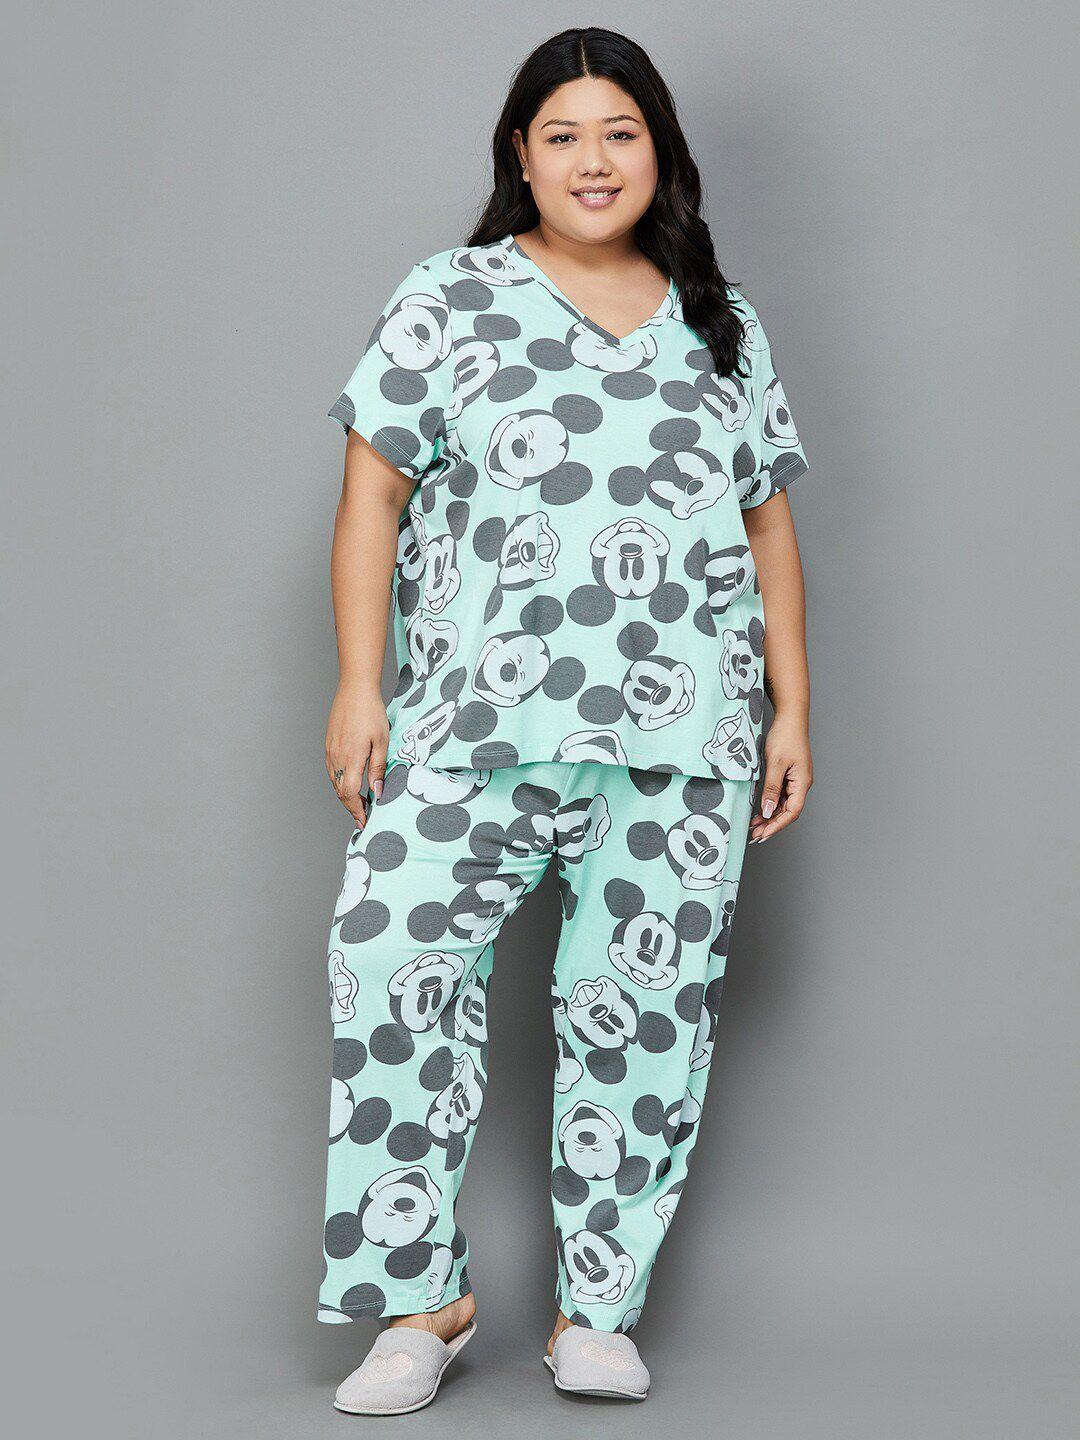 nexus-by-lifestyle-plus-size-mickey-mouse-printed-night-suit